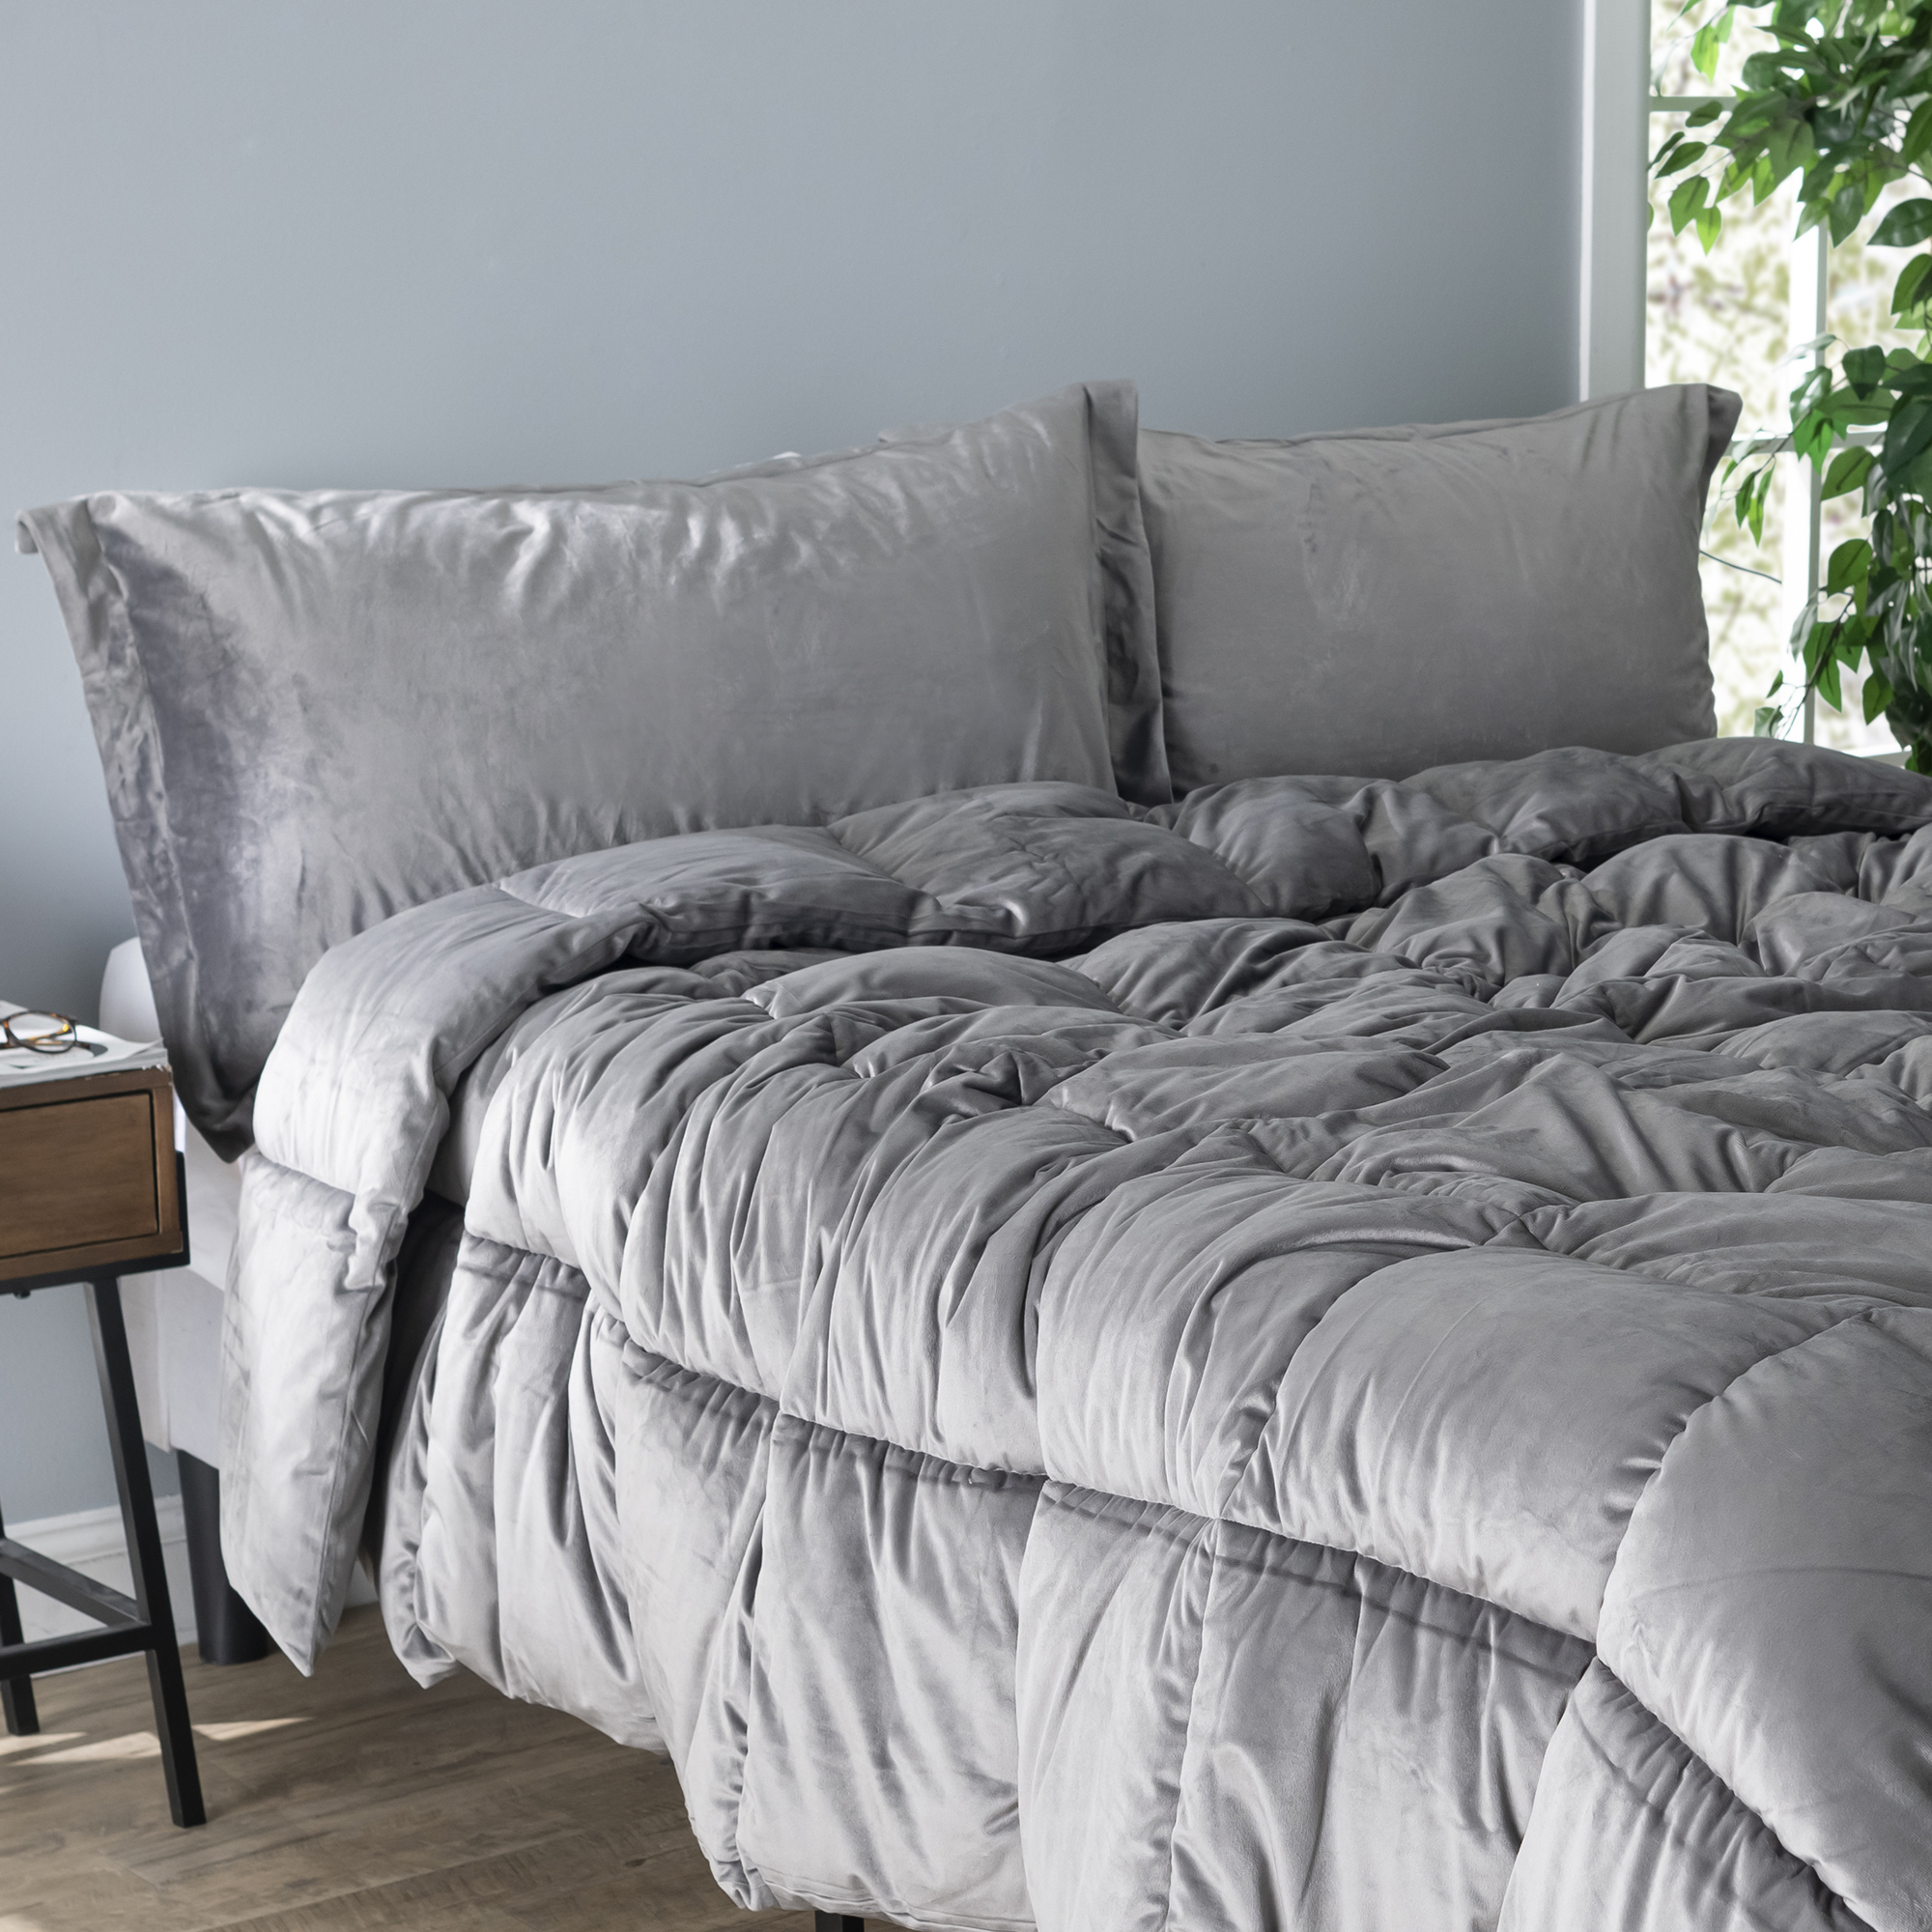 Cuz I'm Cozy - Coma Inducer Oversized Comforter - USA Filled - Storm Cloud Gray